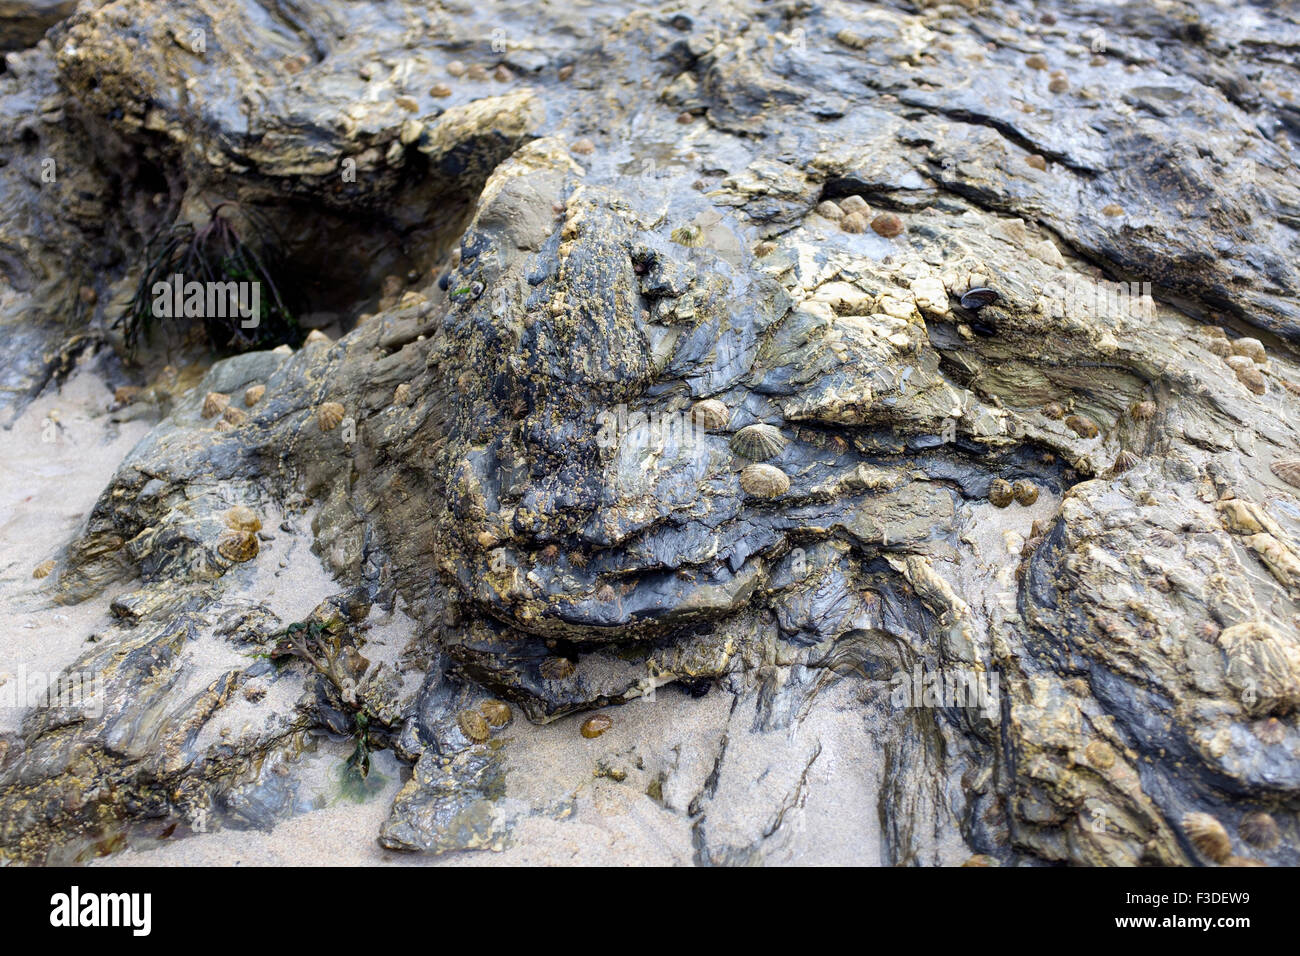 Limpets on rocks reveled by the low tide on Portreath beach in Cornwall. Stock Photo